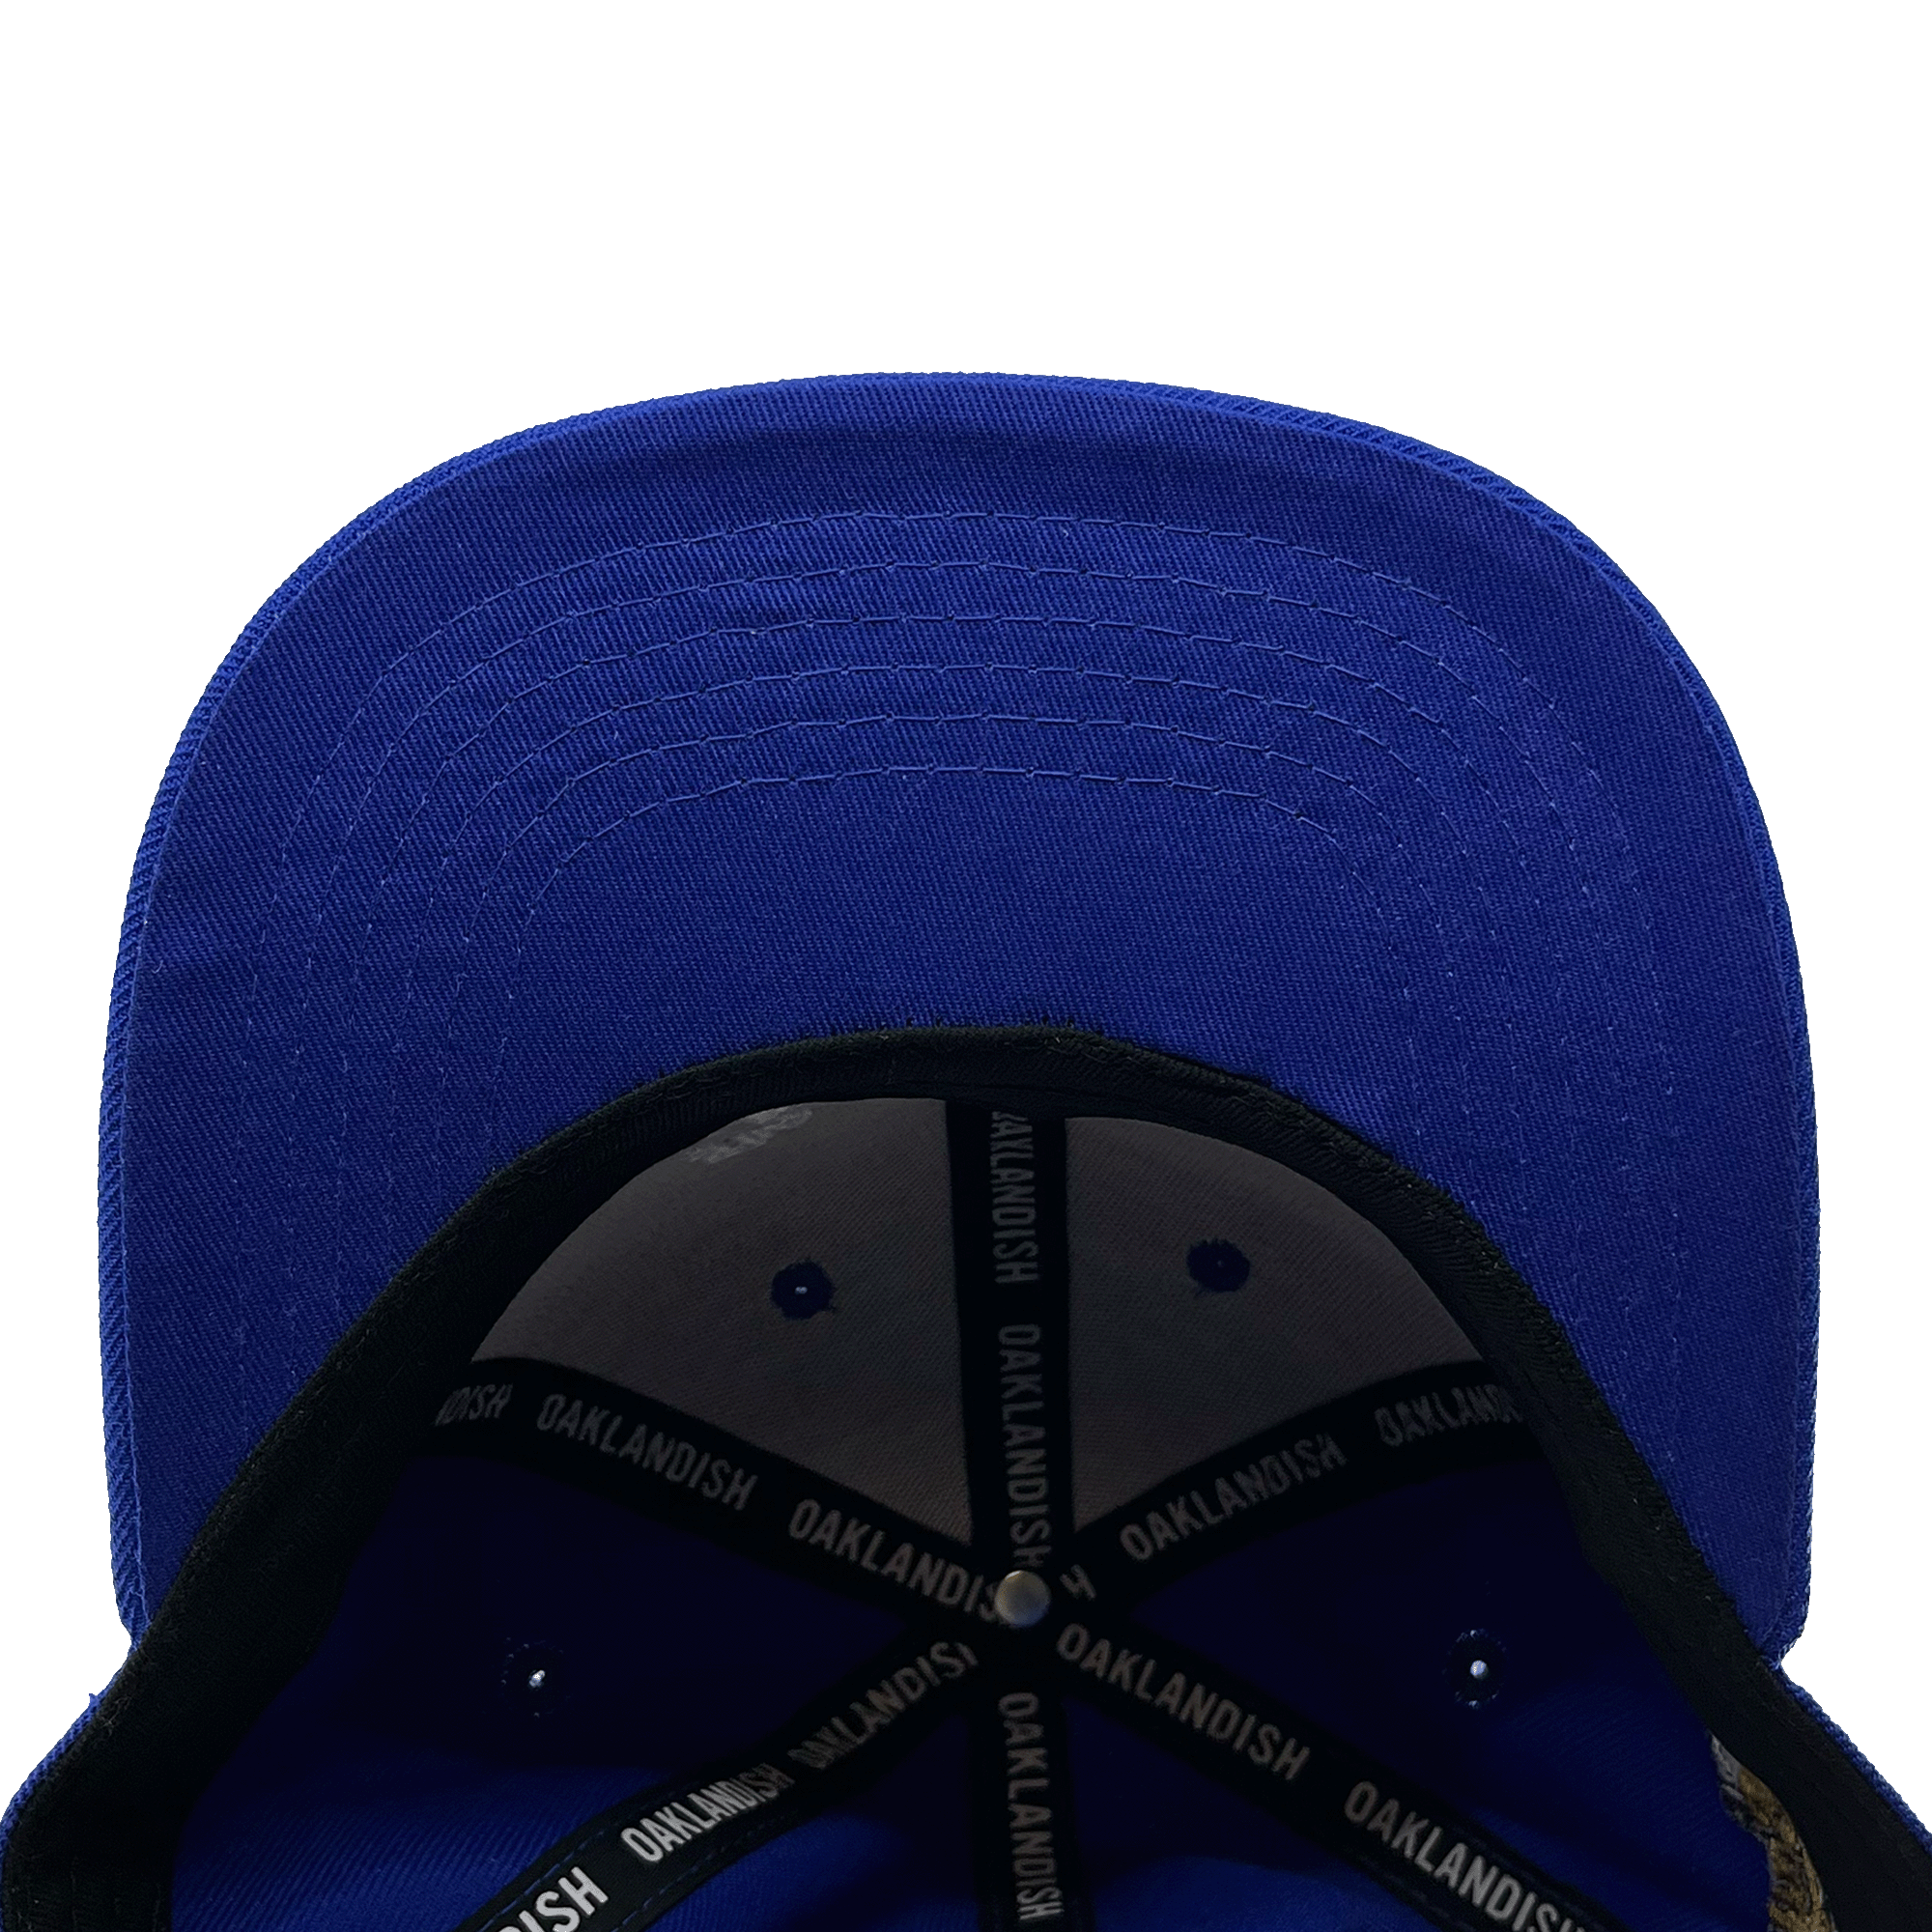 The underside view of a royal blue square flat bill in a blue hat.